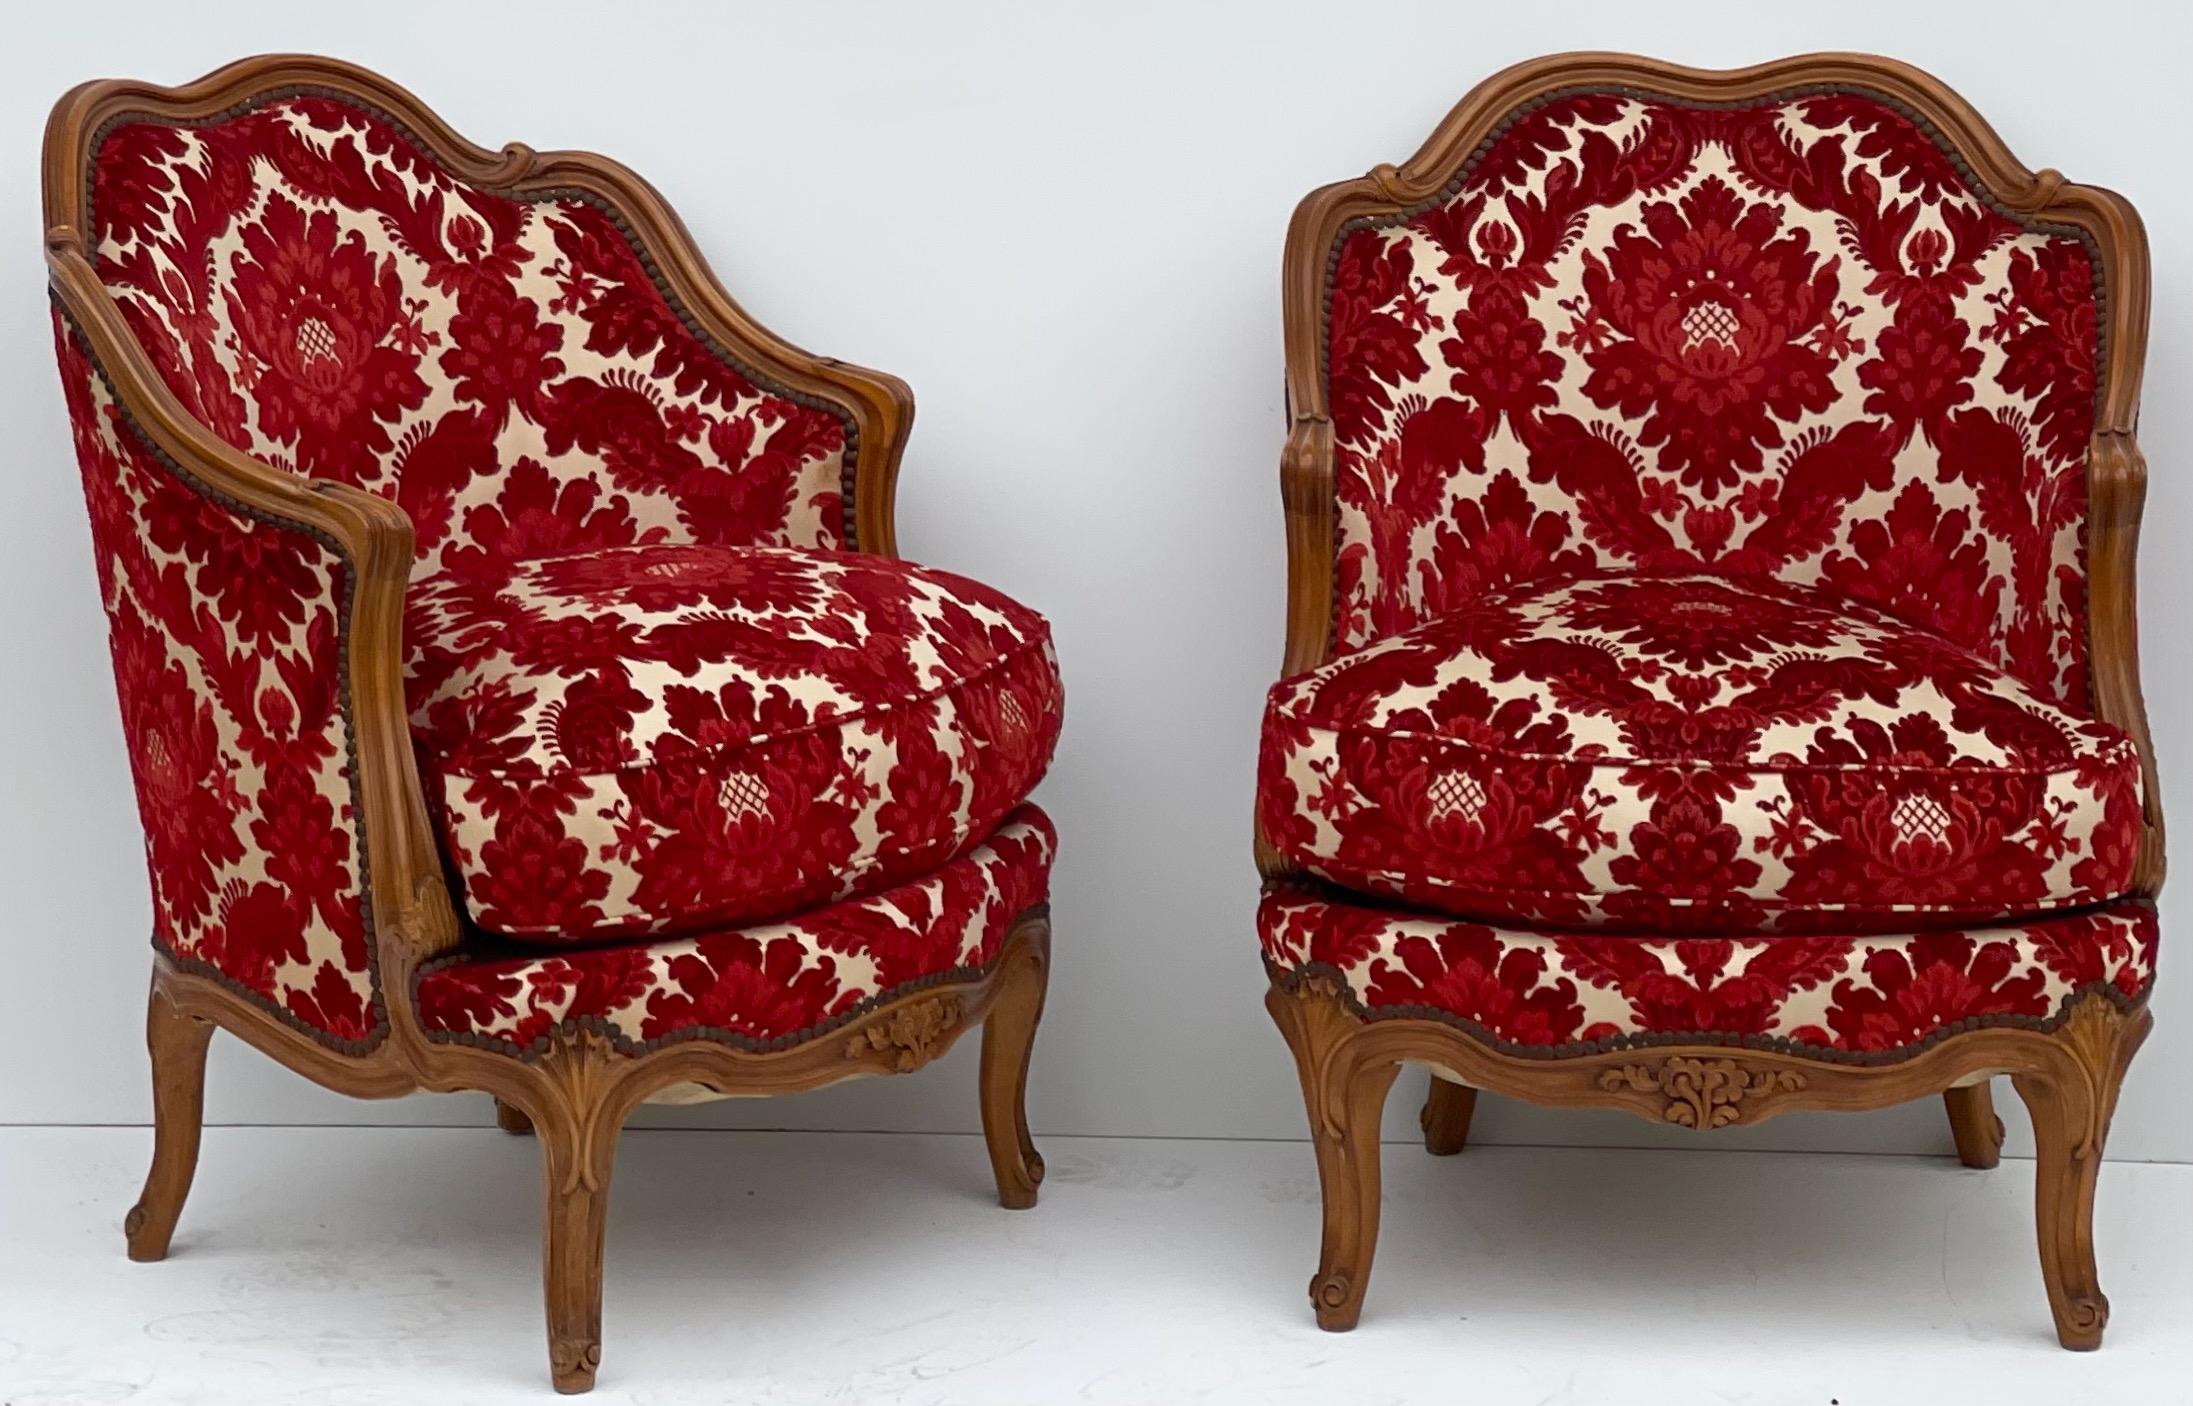 French Provincial 1930s French Carved Fruitwood Chairs in Red Cut Velvet Damask, Pair